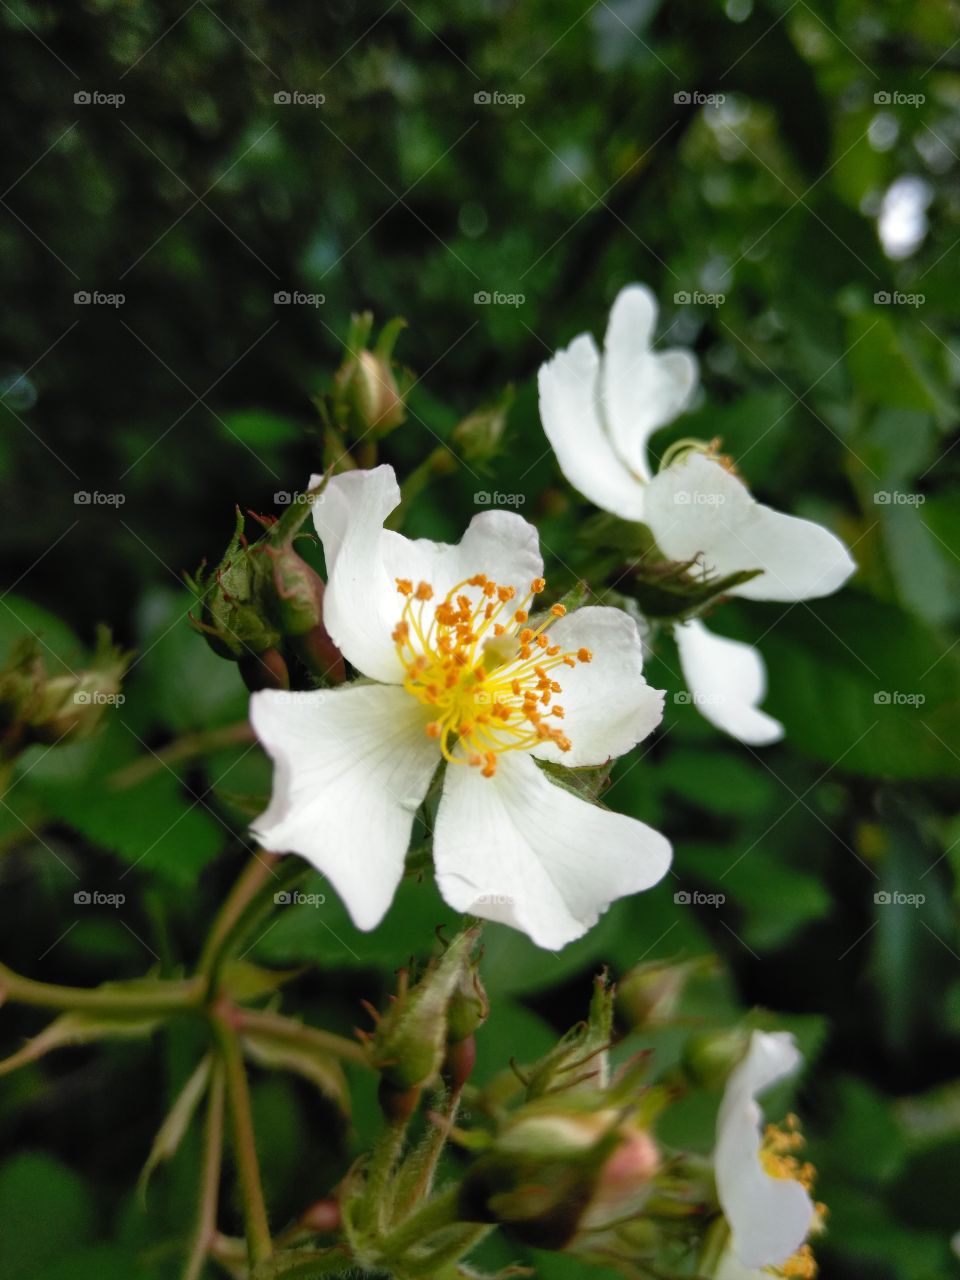 The delicate views of the wild southern rose. Fragrance was exceptional but only lasts for a small time in the spring in the southern United States.